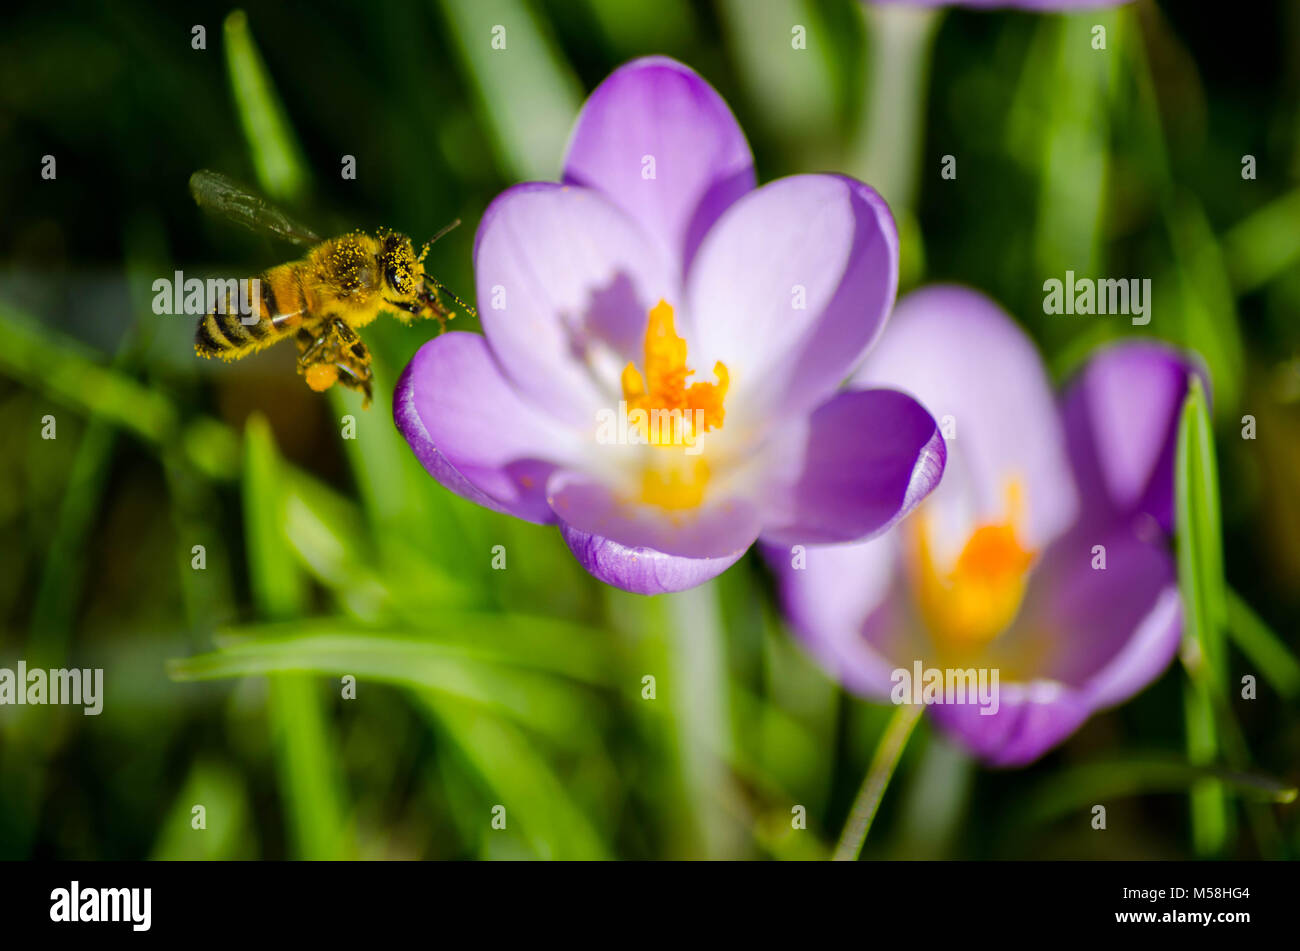 Beauty and the Bee. Close up of a Honey bee and some purple crocuses. Stock Photo